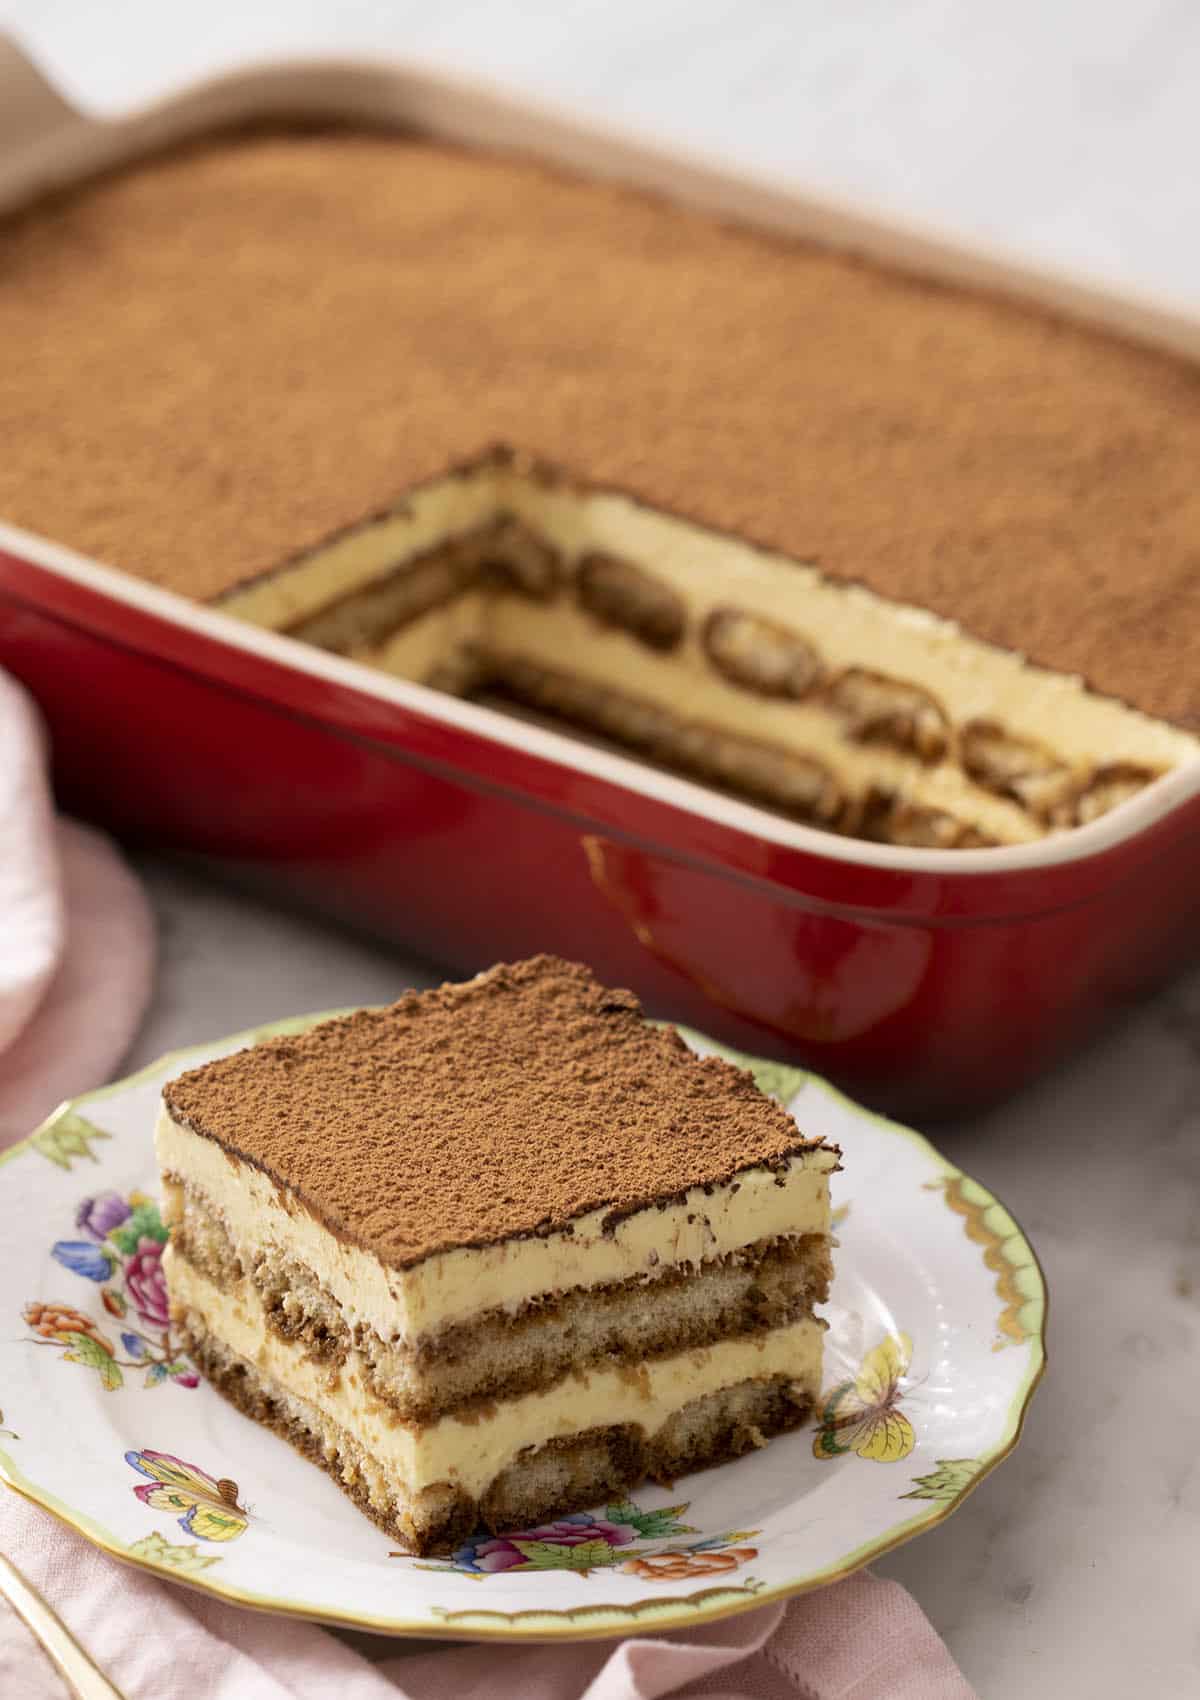 A piece of tiramisu in front of a red serving dish.